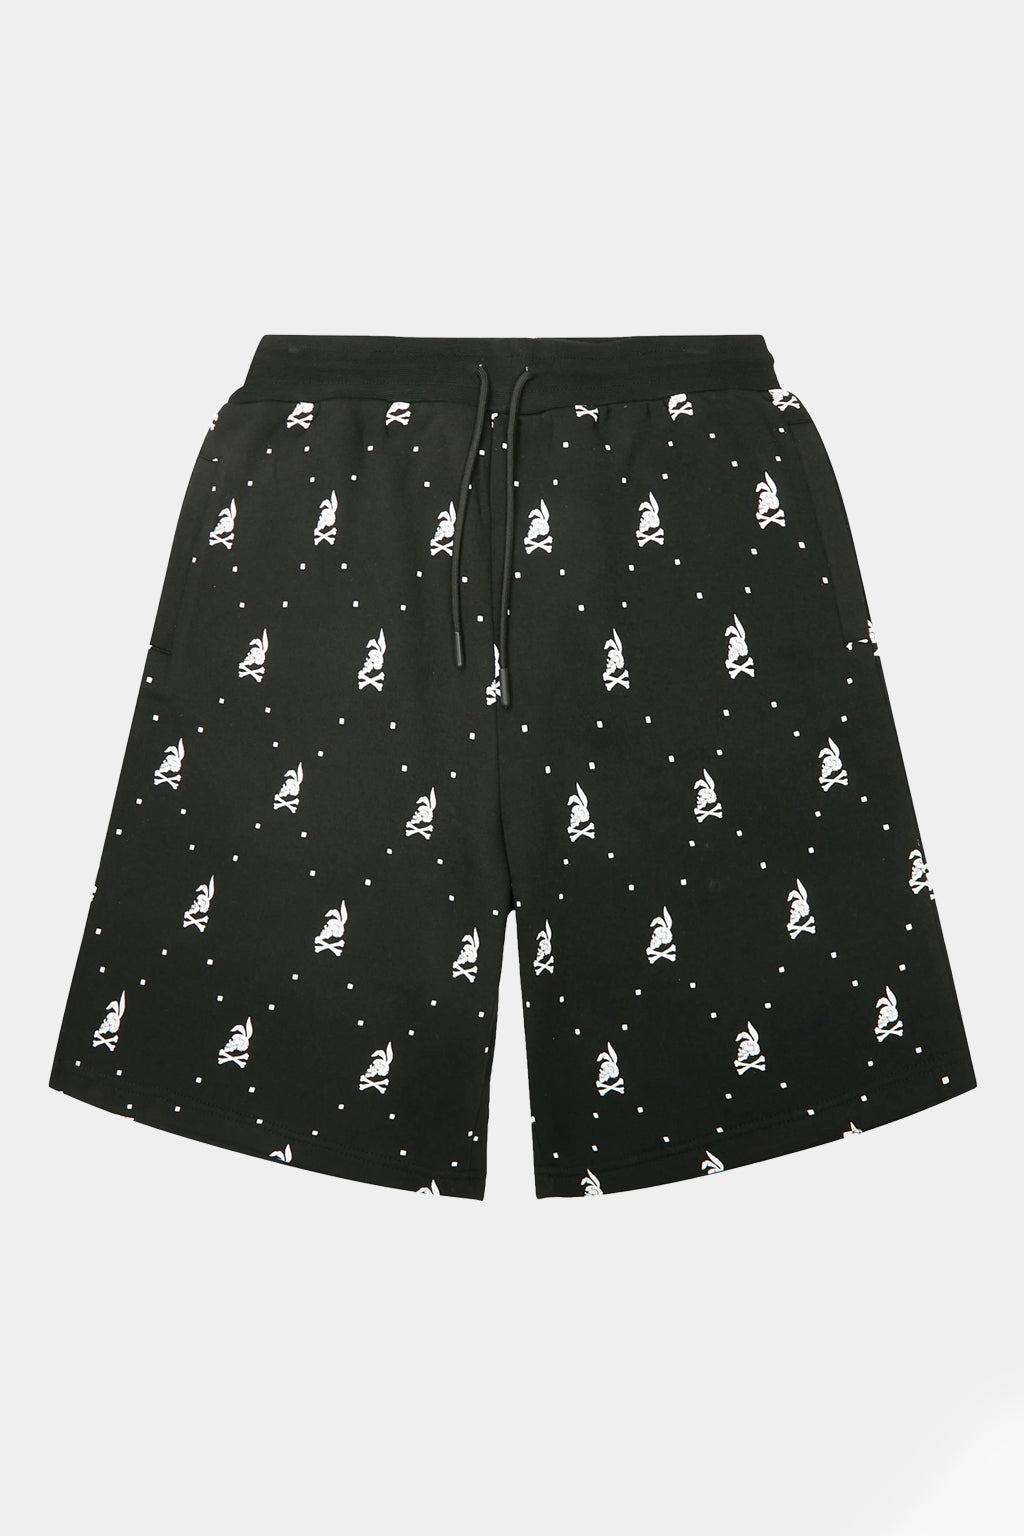 Crooks and Castles - Skull Bunny AOP Shorts